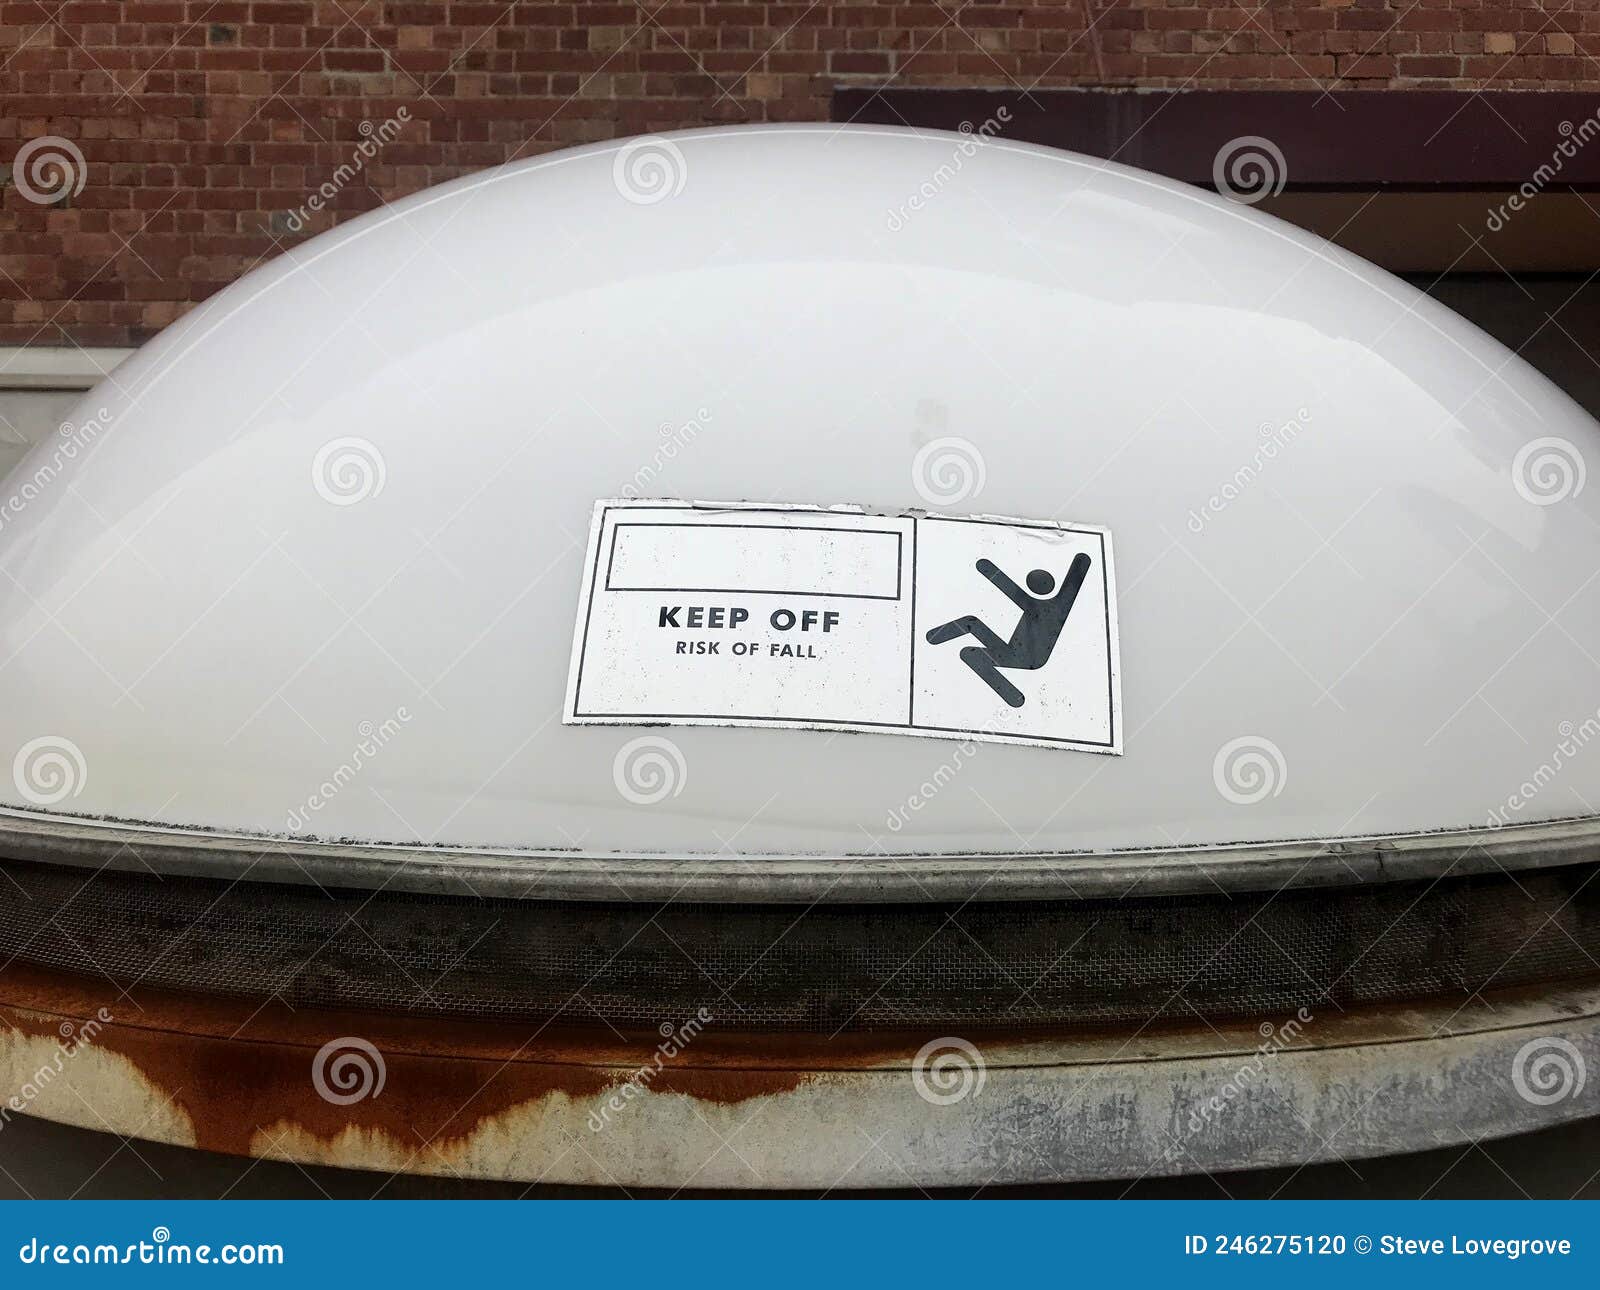 domed translucent perspex skylight on a building roof